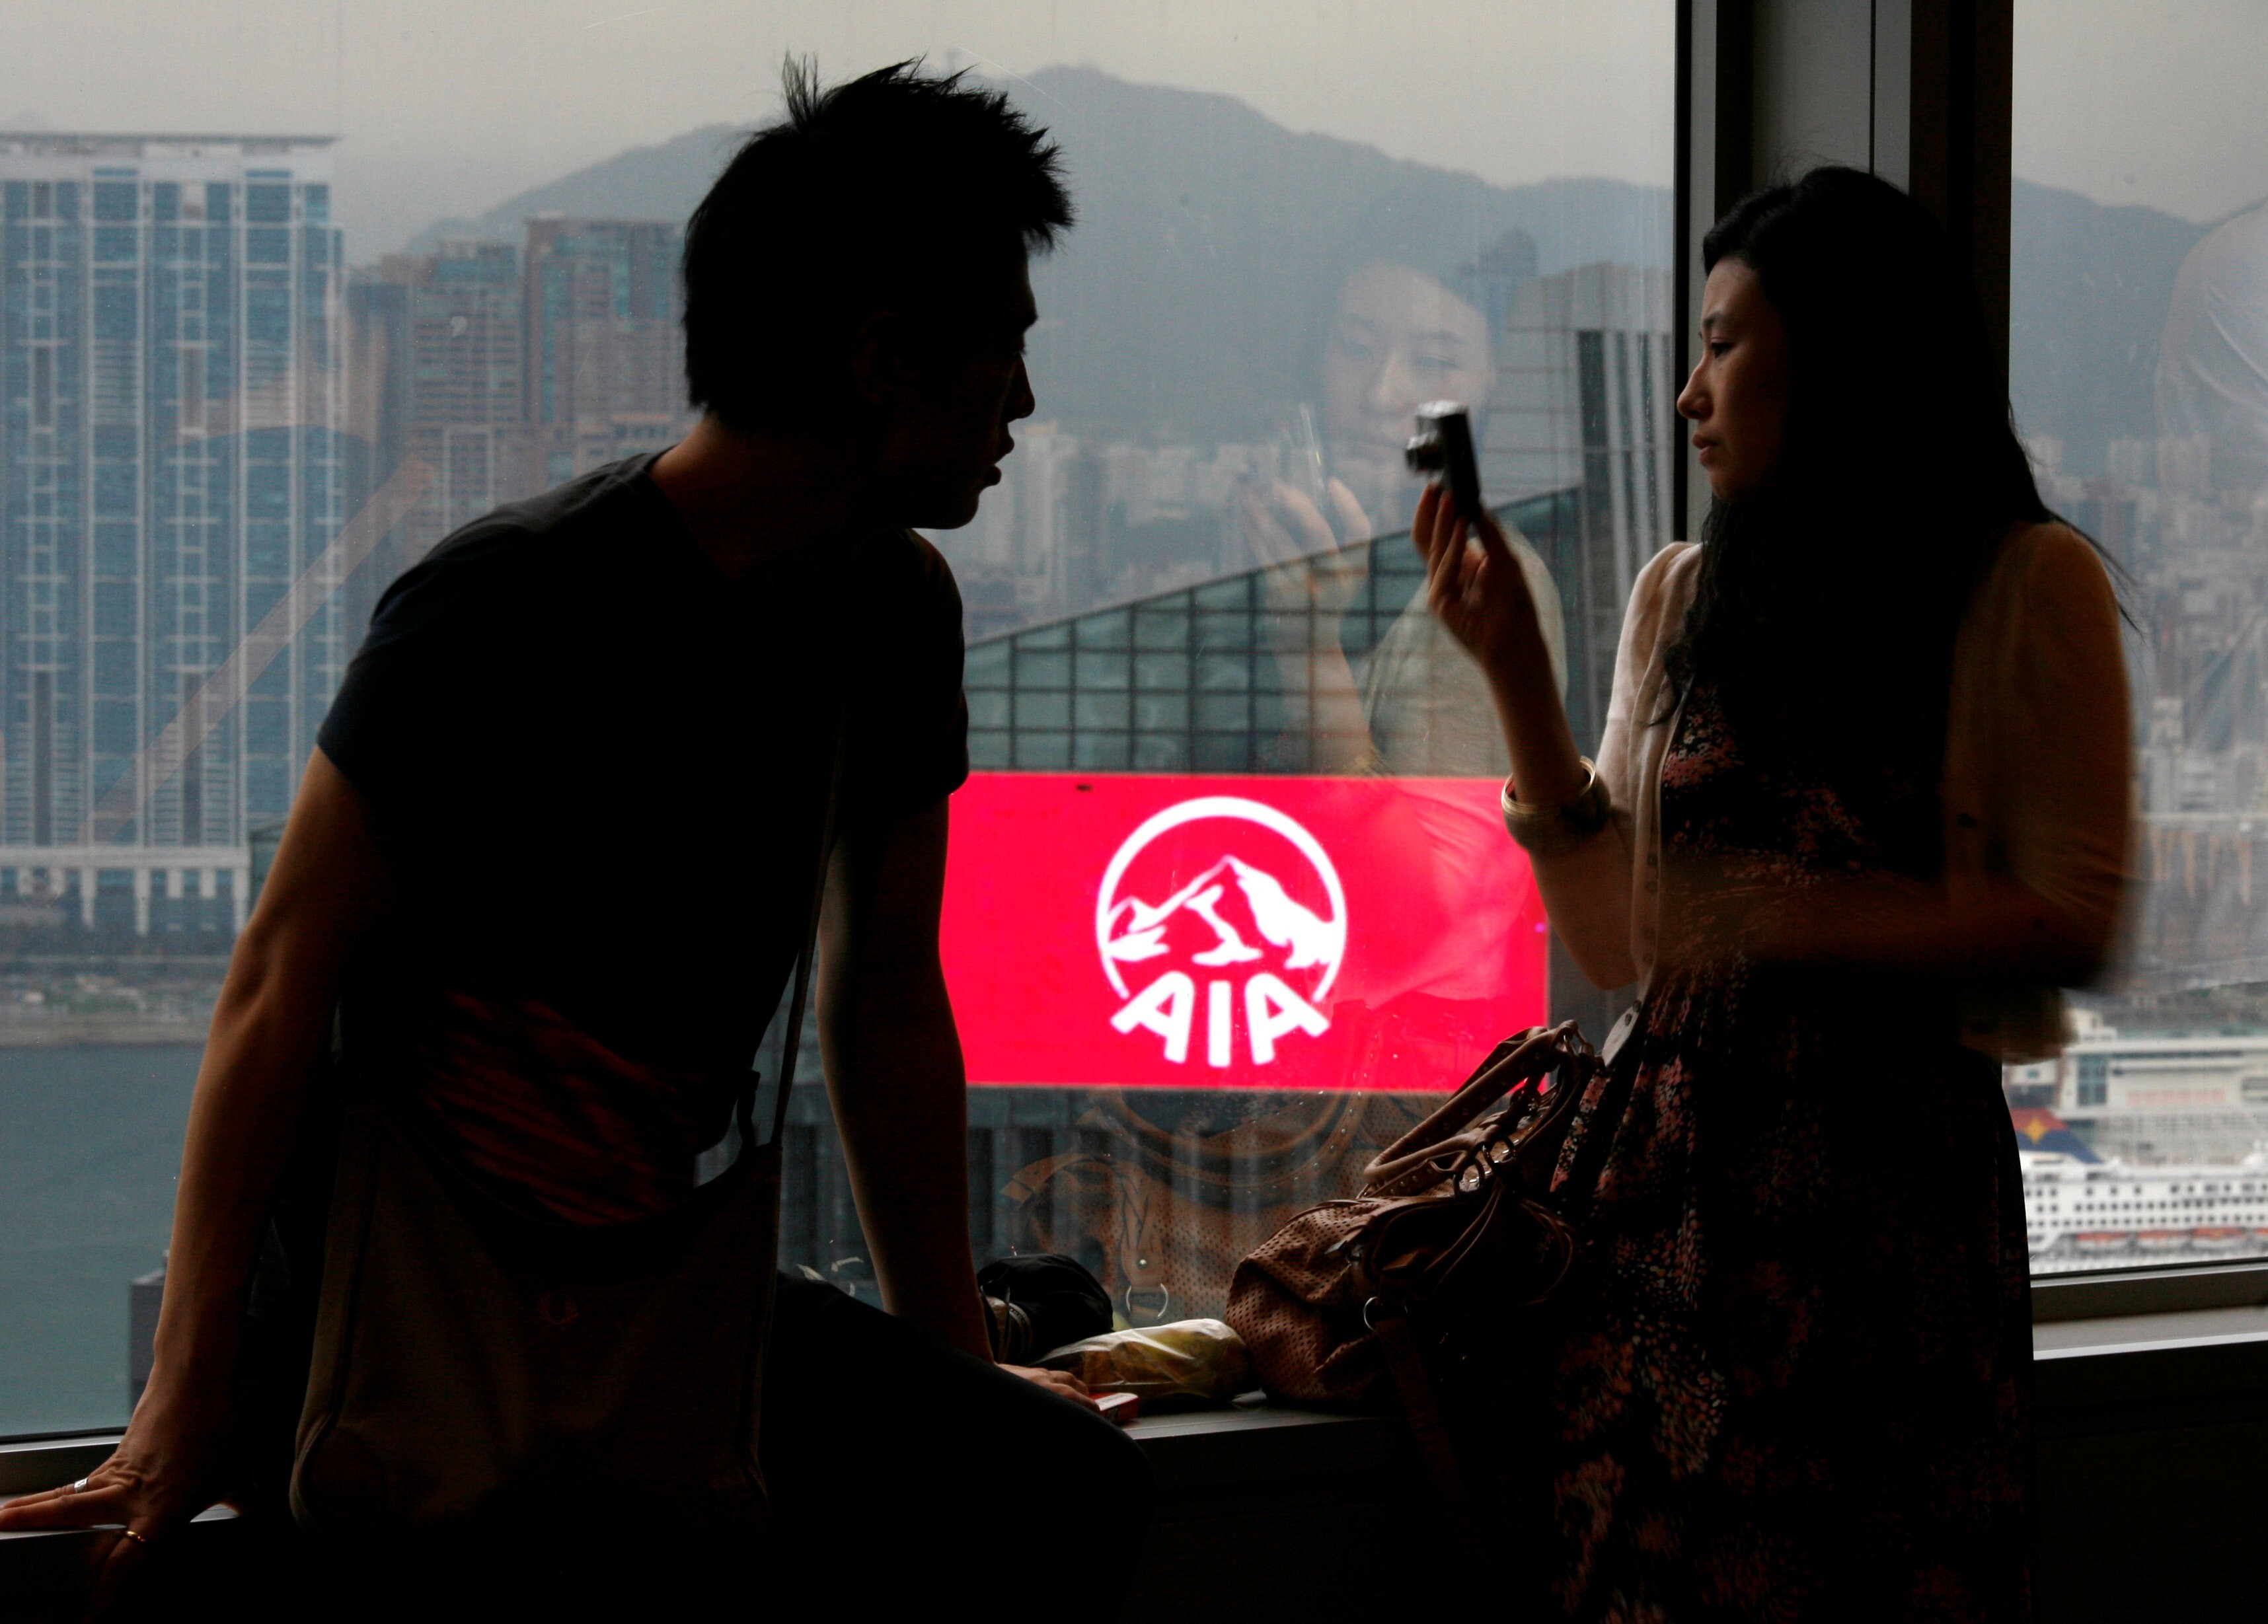 View of the AIA logo from the interior of the Bank of China Tower in Hong Kong on August 12, 2009. Photo: Reuters